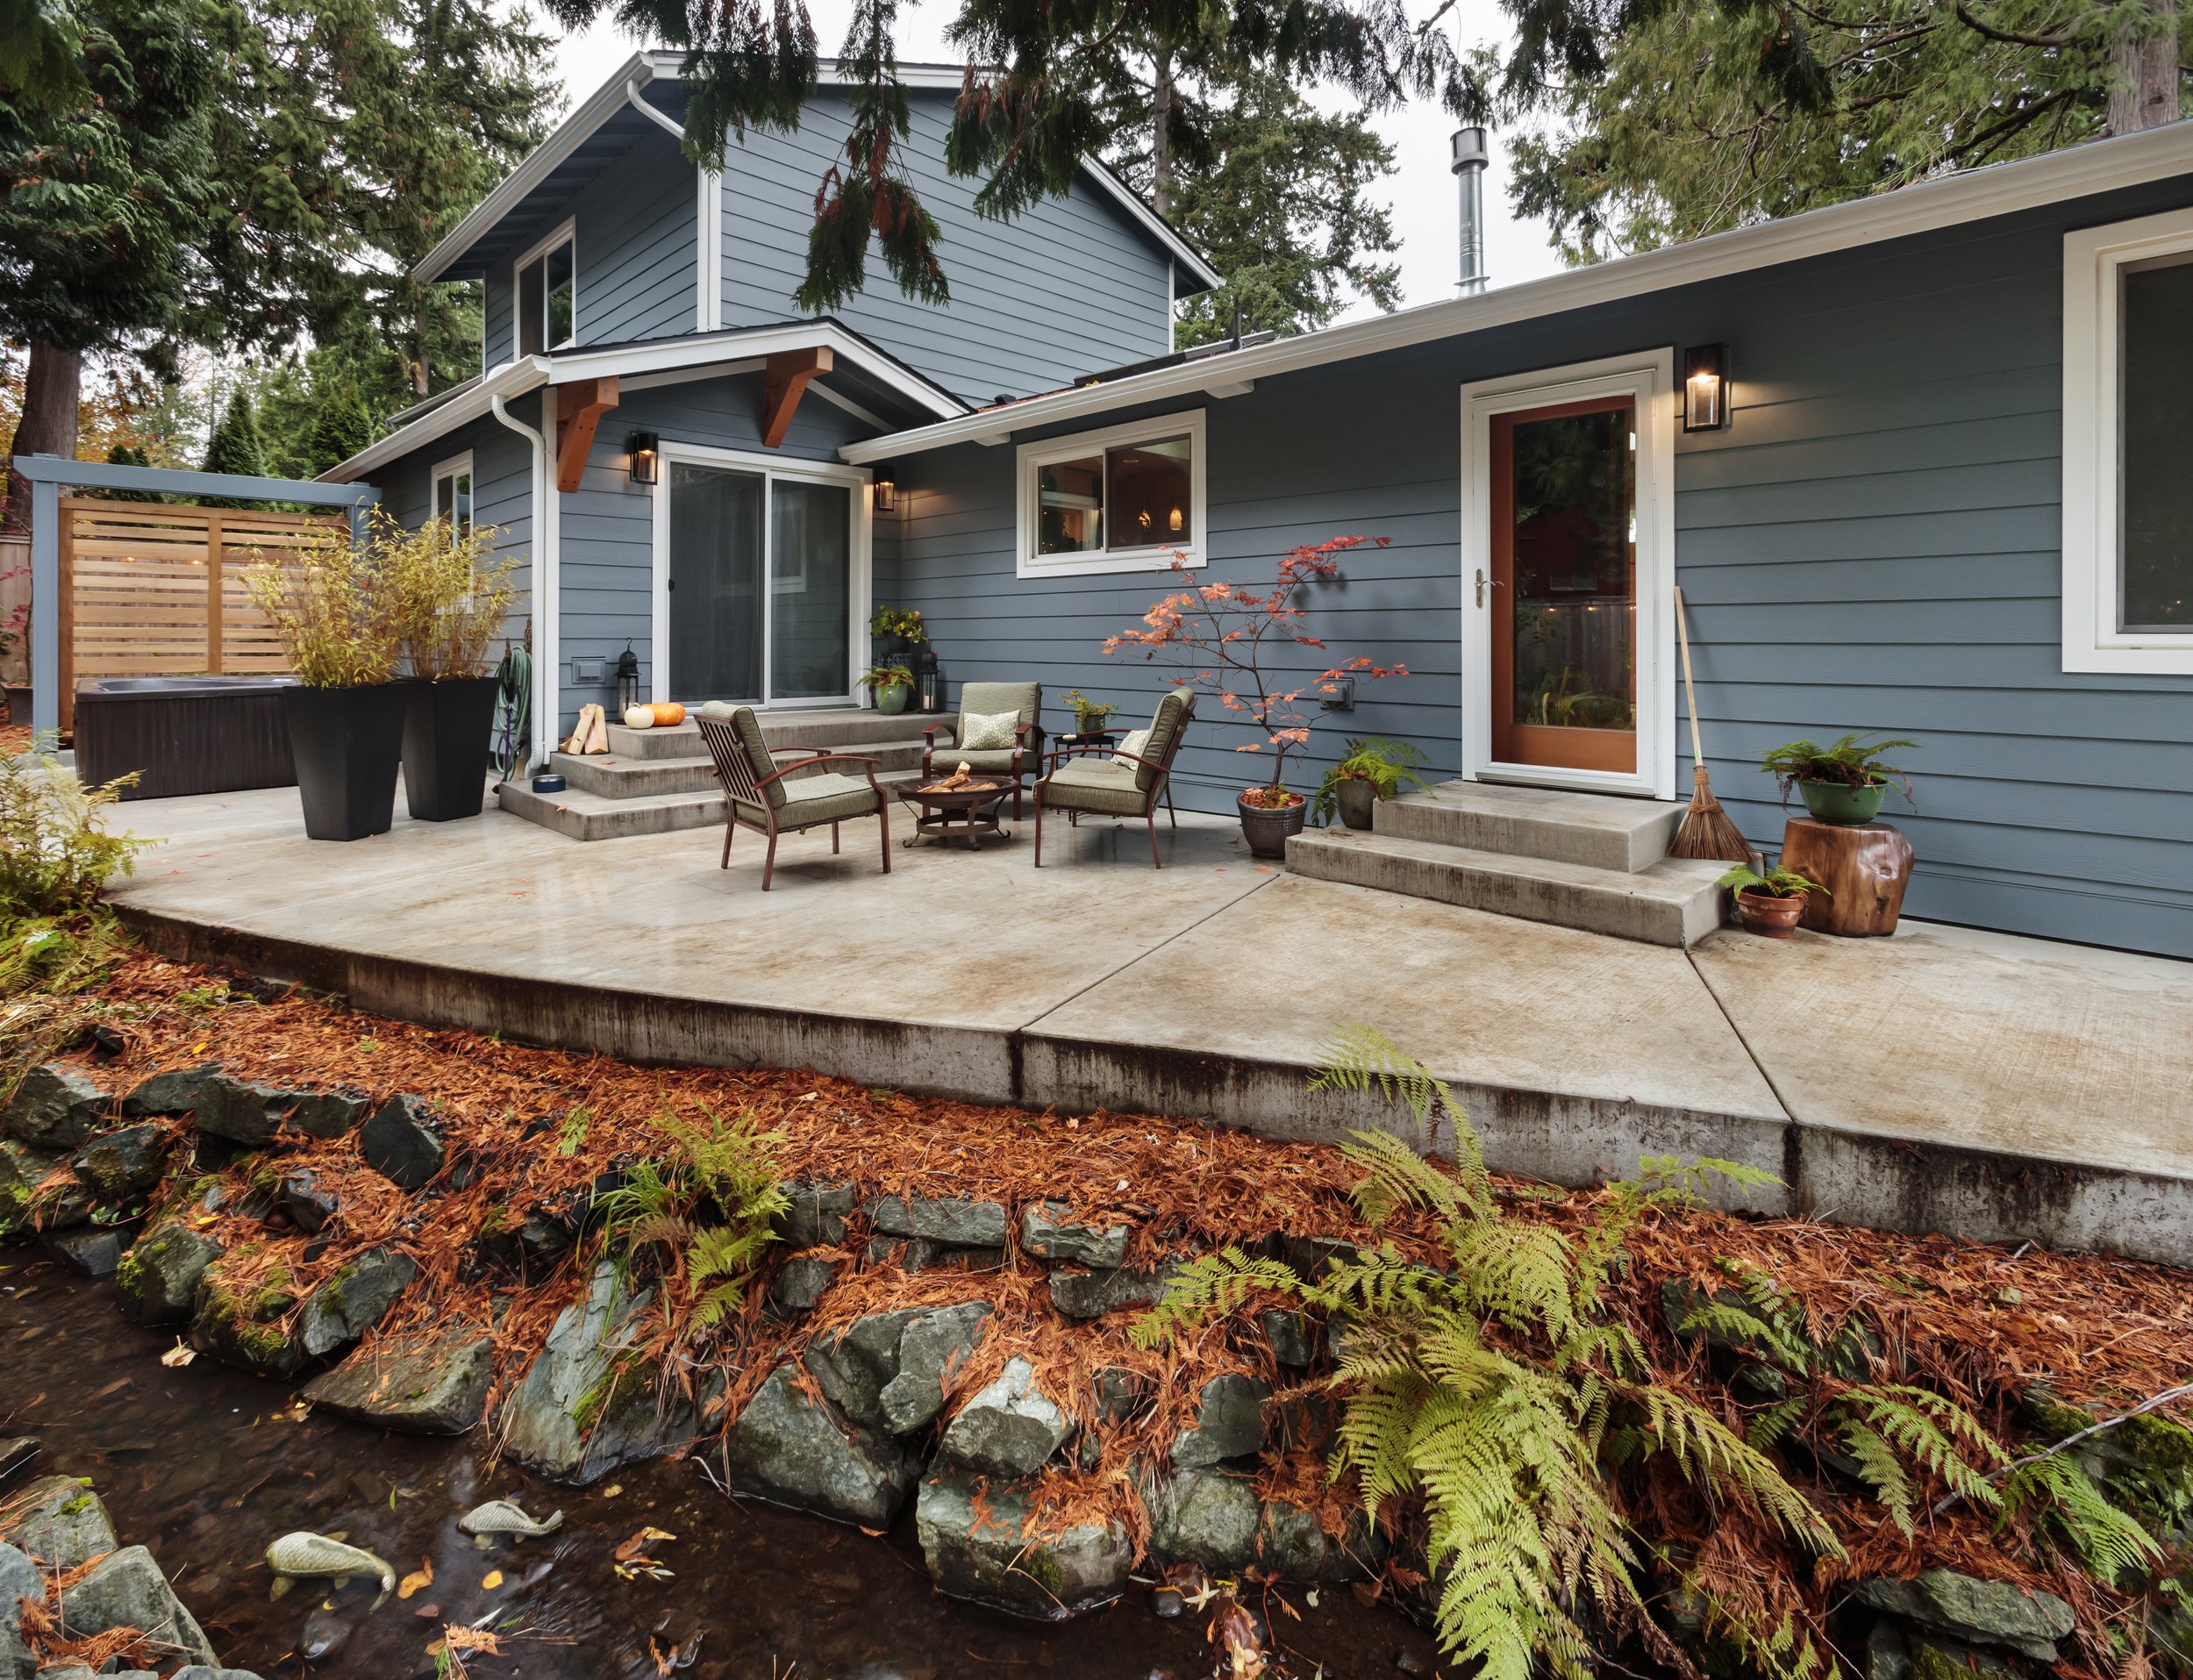  Using poured concrete for the new patio allows for a sinuous shape that follows the lovely creek running through the Cook’s back yard, and creates a natural connection to the new steps and landings that also minimizes maintenance. 